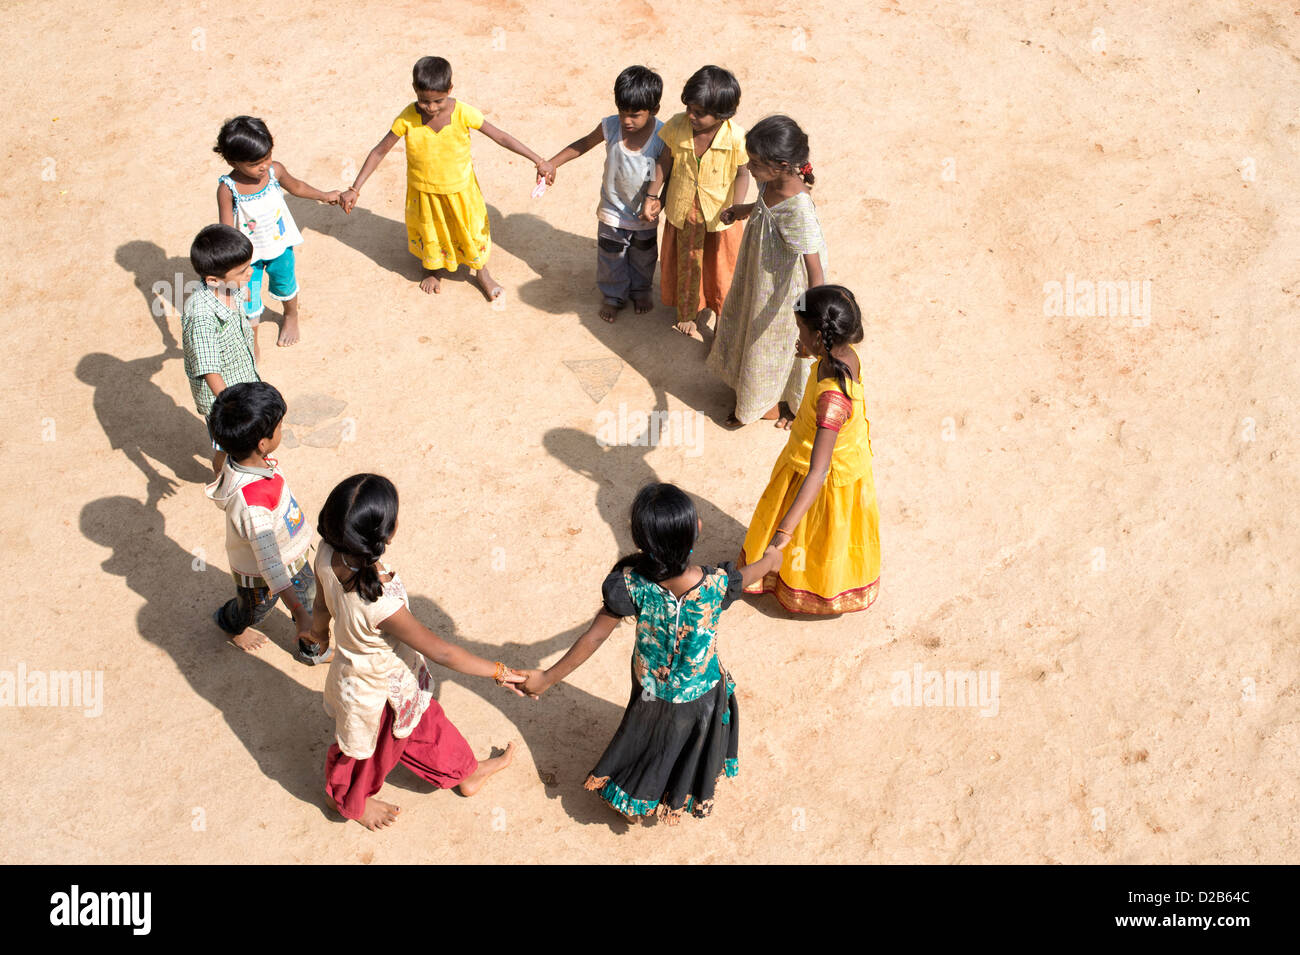 Indian village children in a circle holding hands playing games. Andhra Pradesh, India Stock Photo